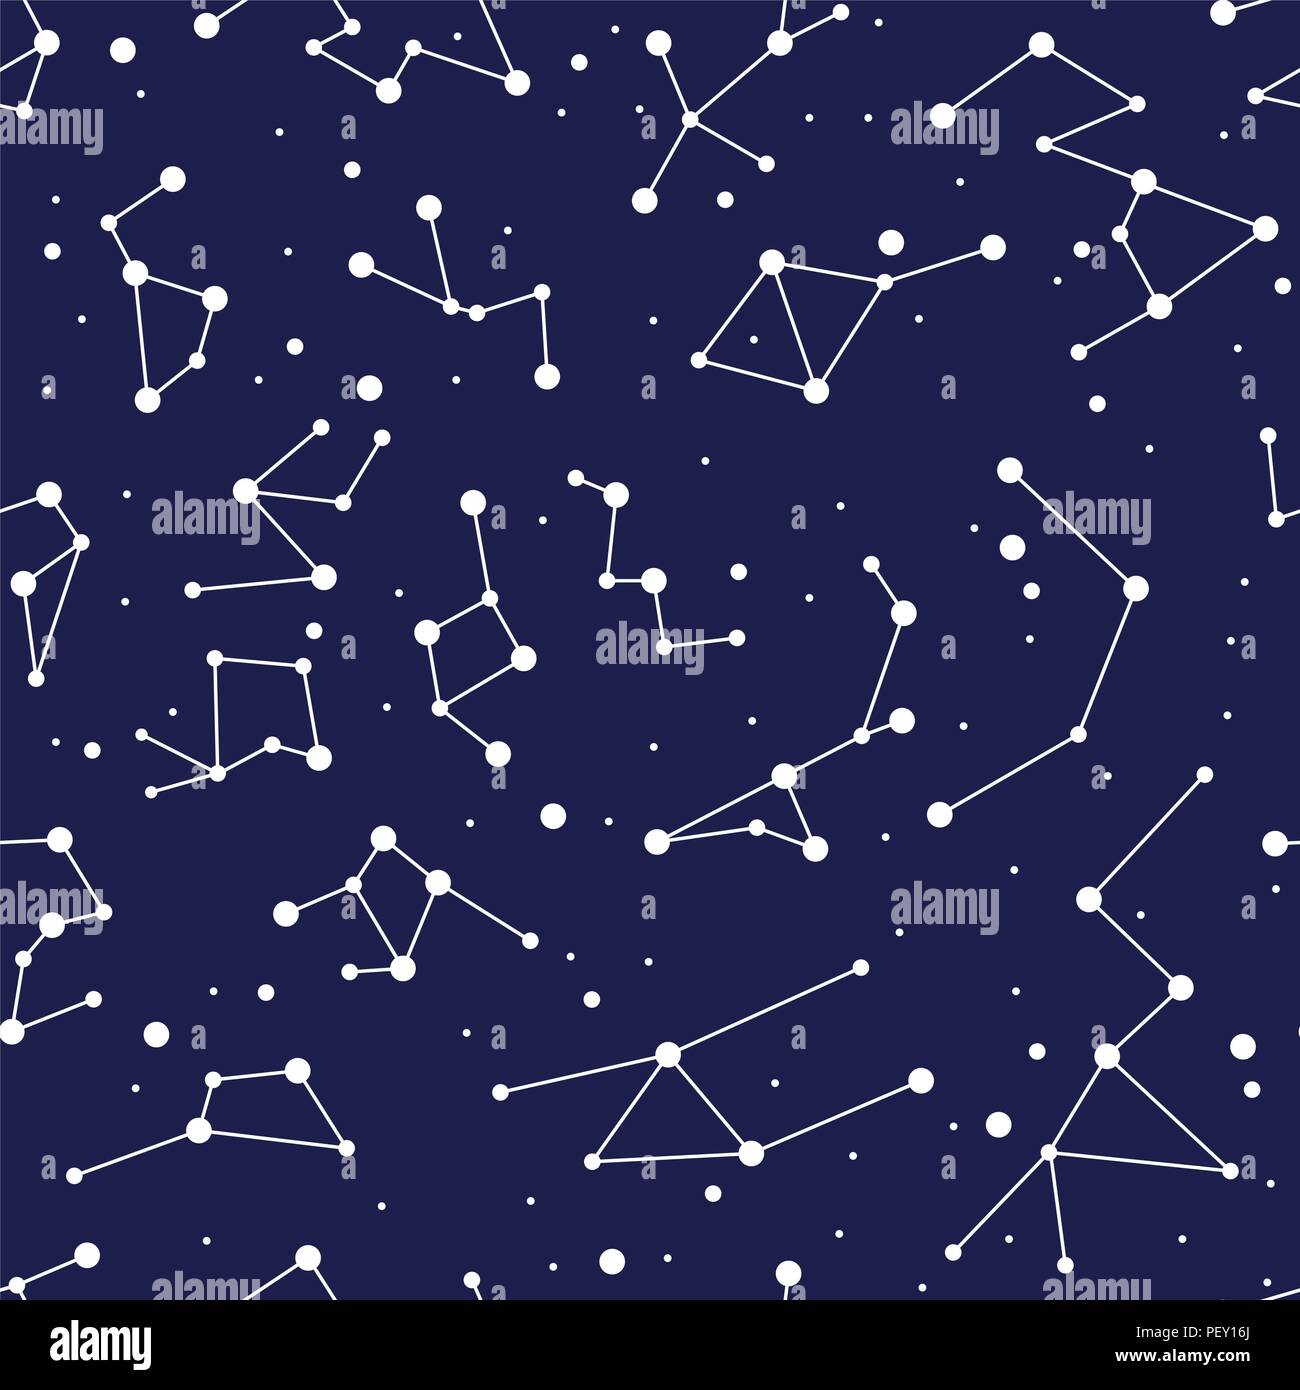 vector constellation seamless background pattern. zodiac map with stars in blue space. astronomy abstract illustration with astrological symbols. nigh Stock Vector